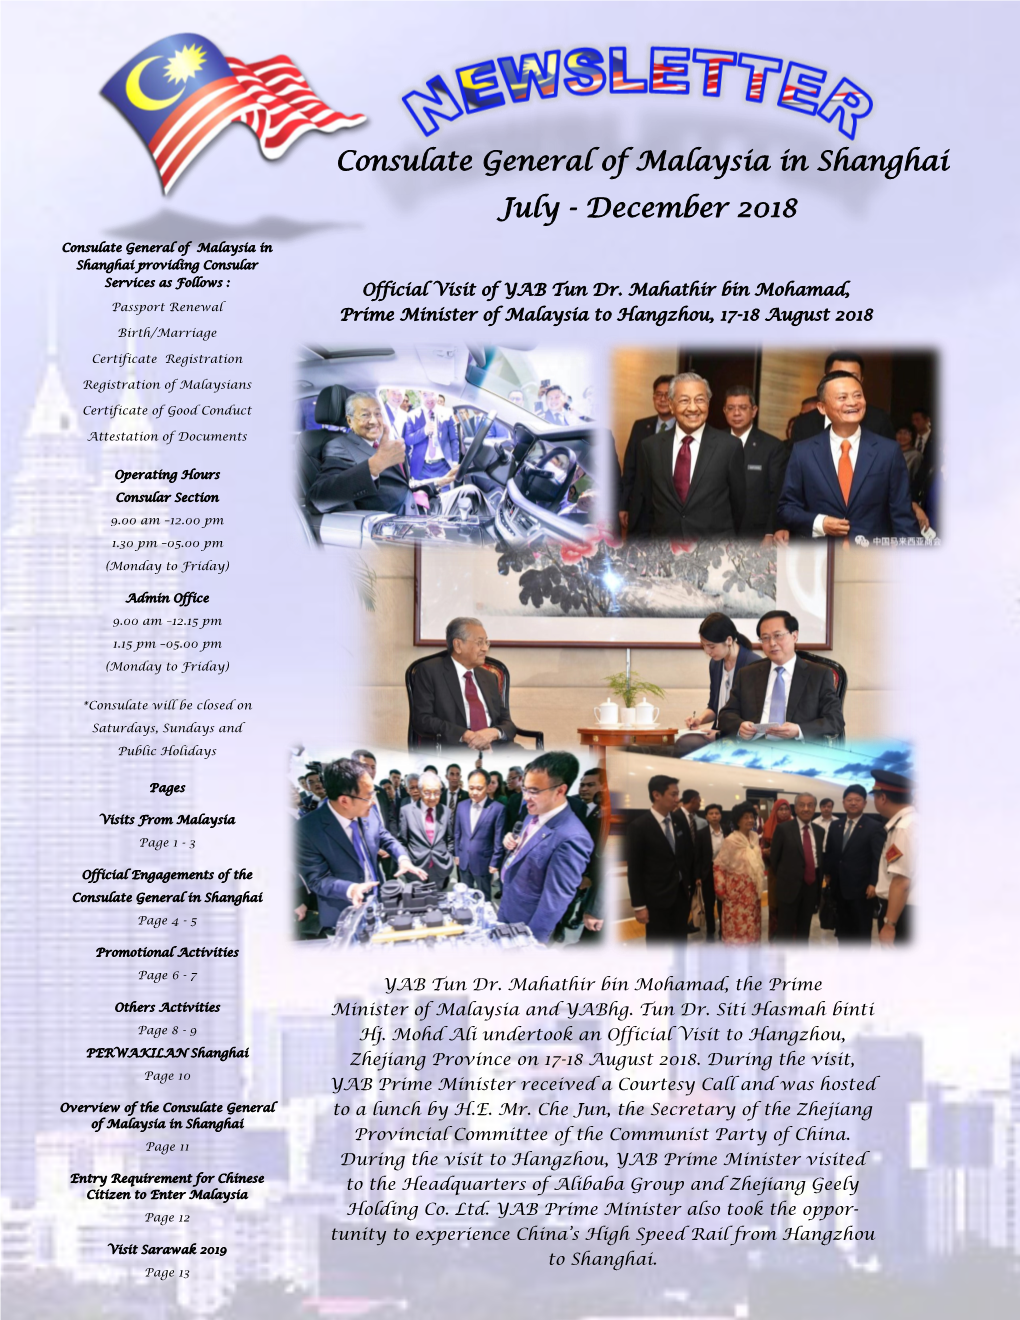 Consulate General of Malaysia in Shanghai July - December 2018